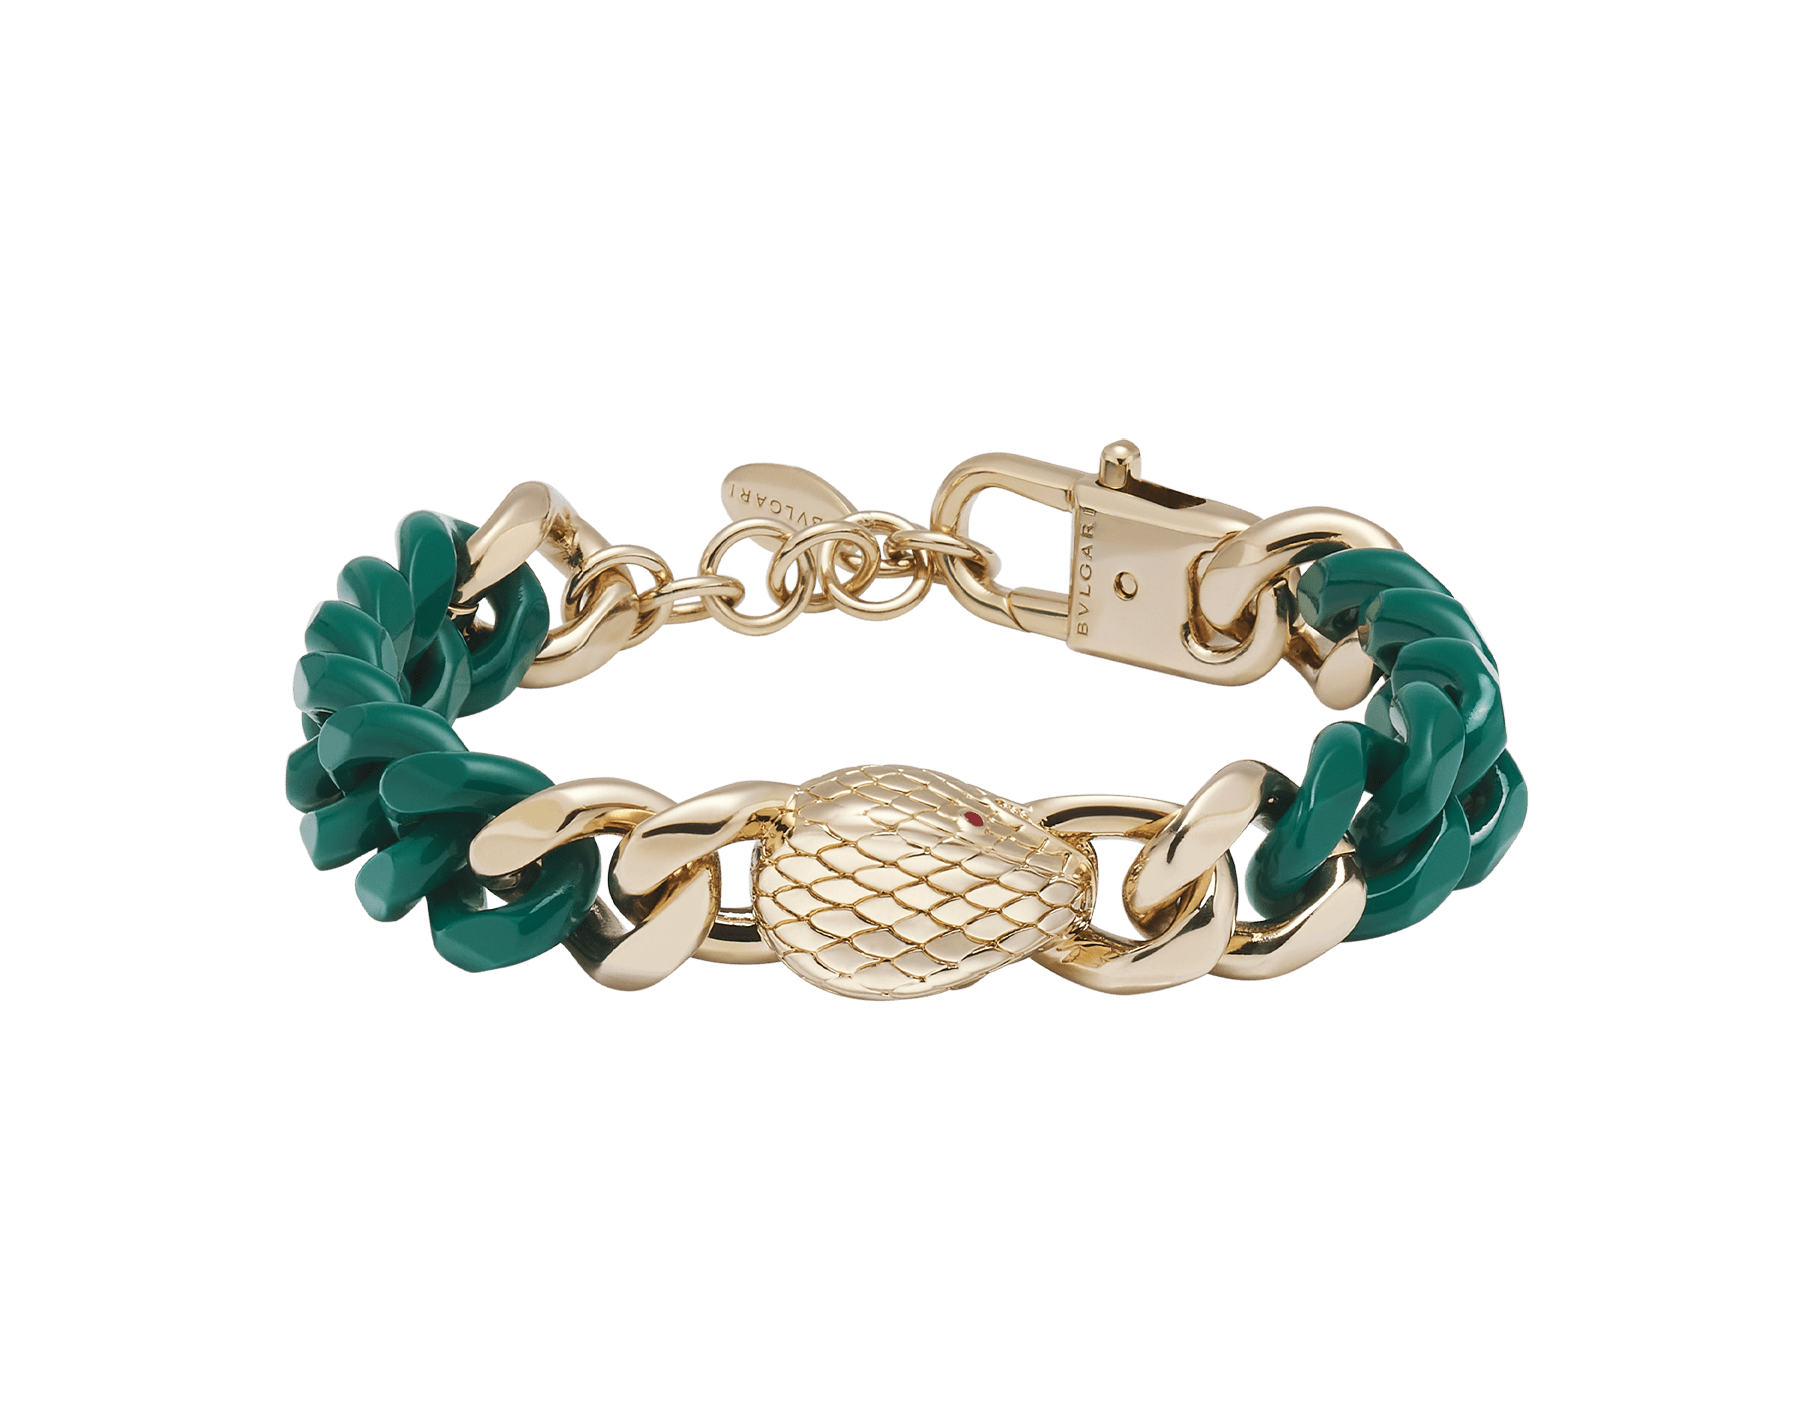 Serpenti Forever Maxi Chain bracelet in light gold-plated brass, with partial emerald green enamel. Captivating snakehead embellishment with red enamel eyes in the middle, and adjustable closure. SERP-CHUNKYCHAINb image 1